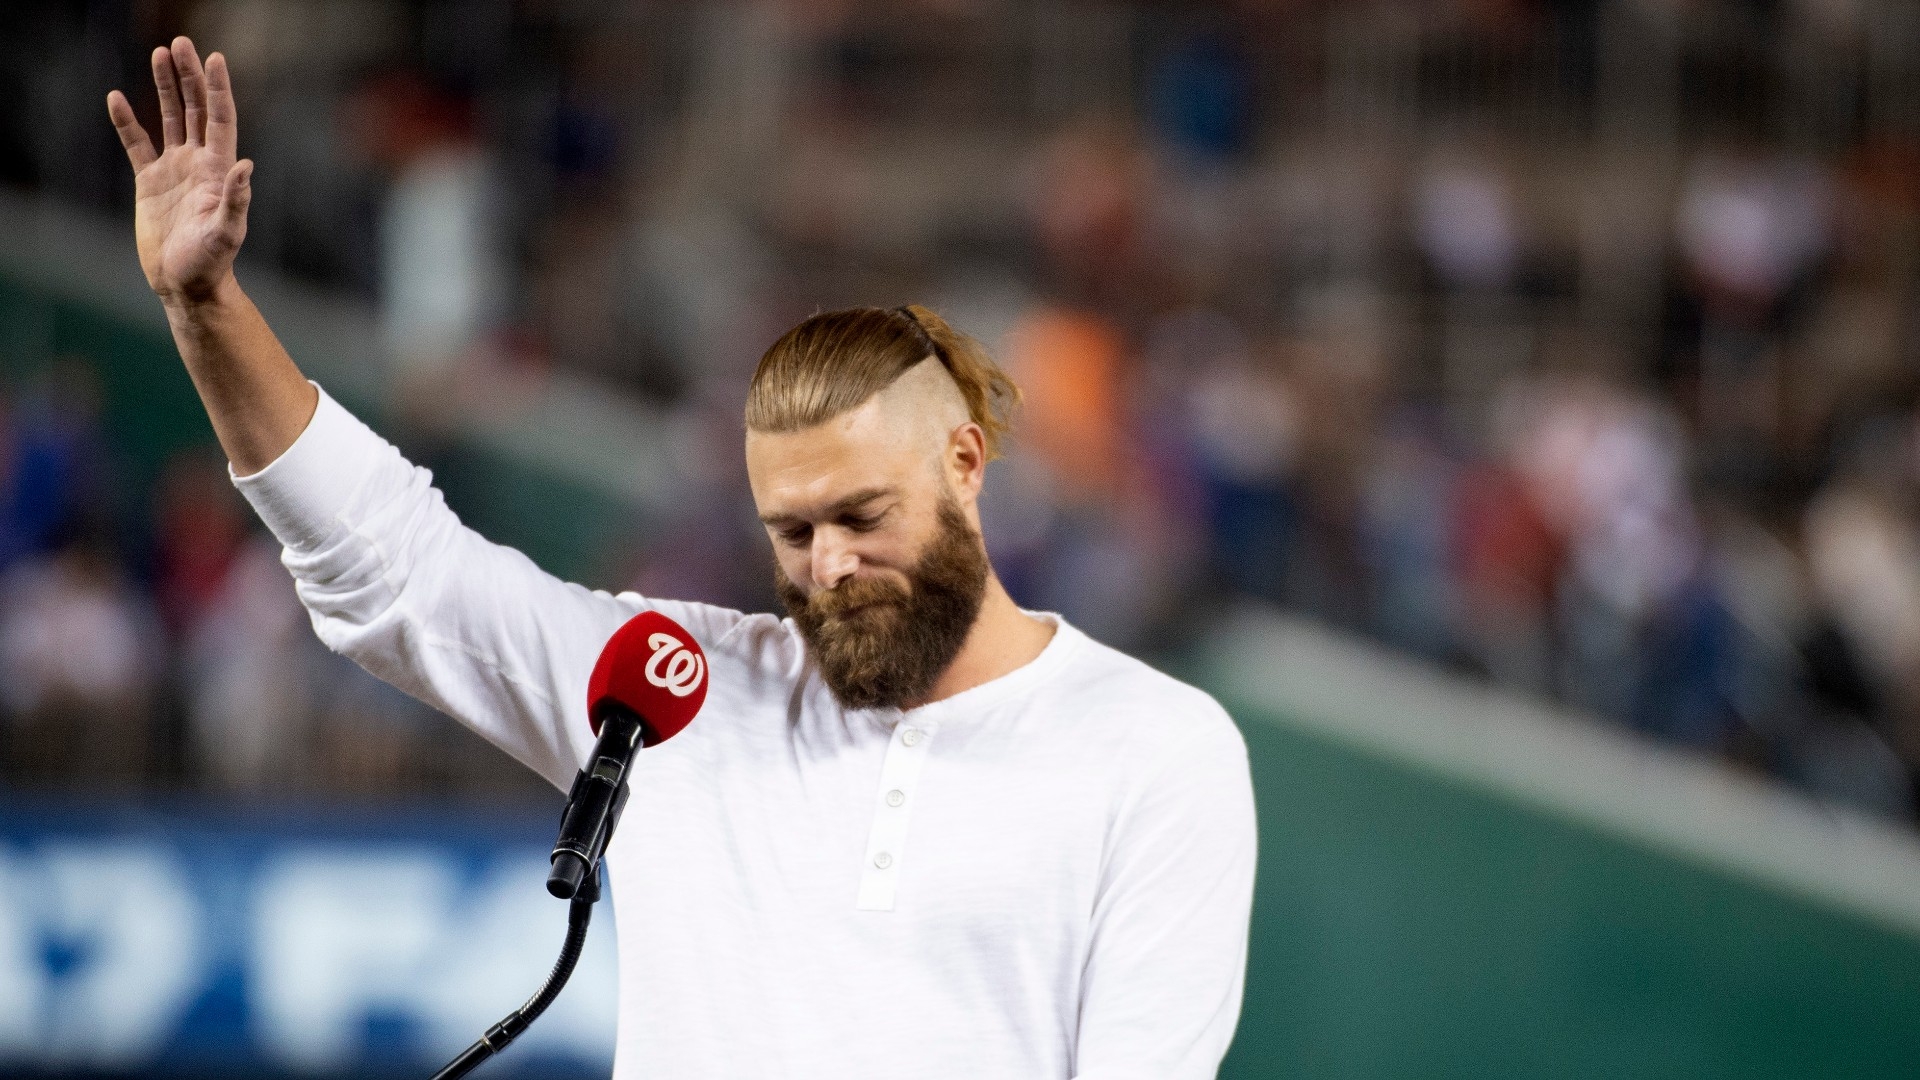 Take a look inside Jayson Werth's $6.5M Virginia home for sale